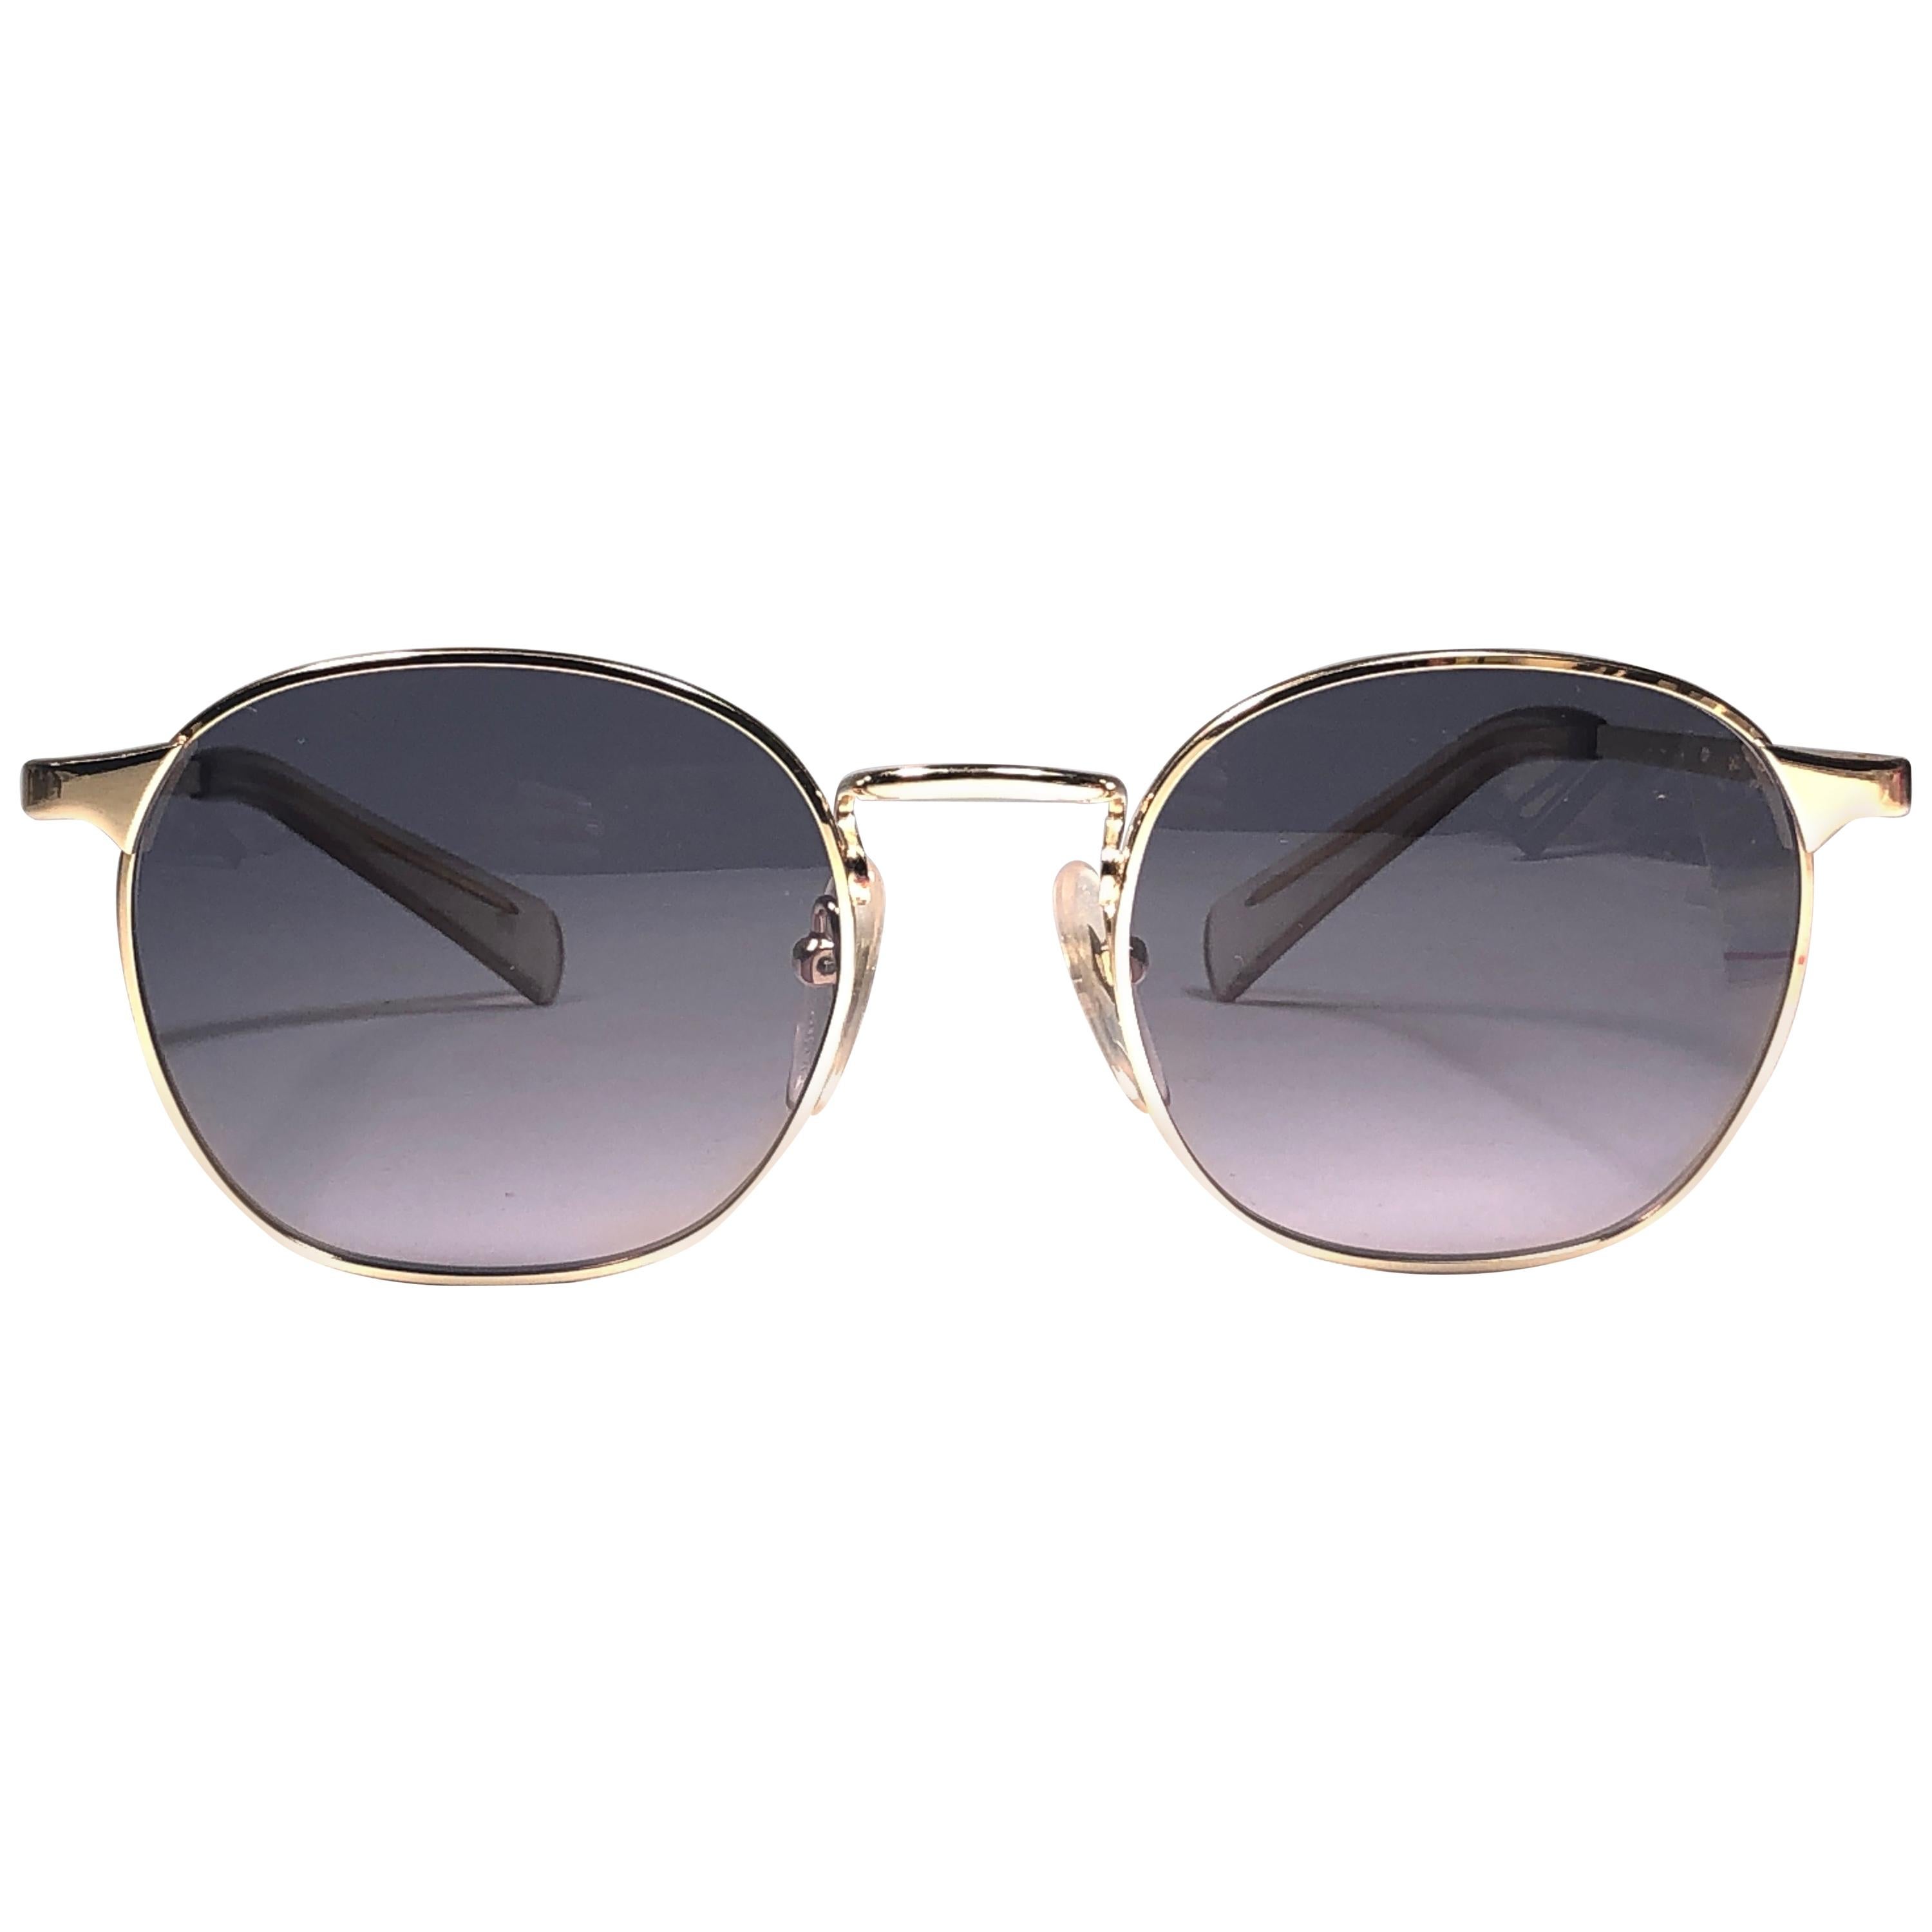 New Jean Paul Gaultier 57 0172 Oval Gold Sunglasses 1990's Made in Japan  For Sale